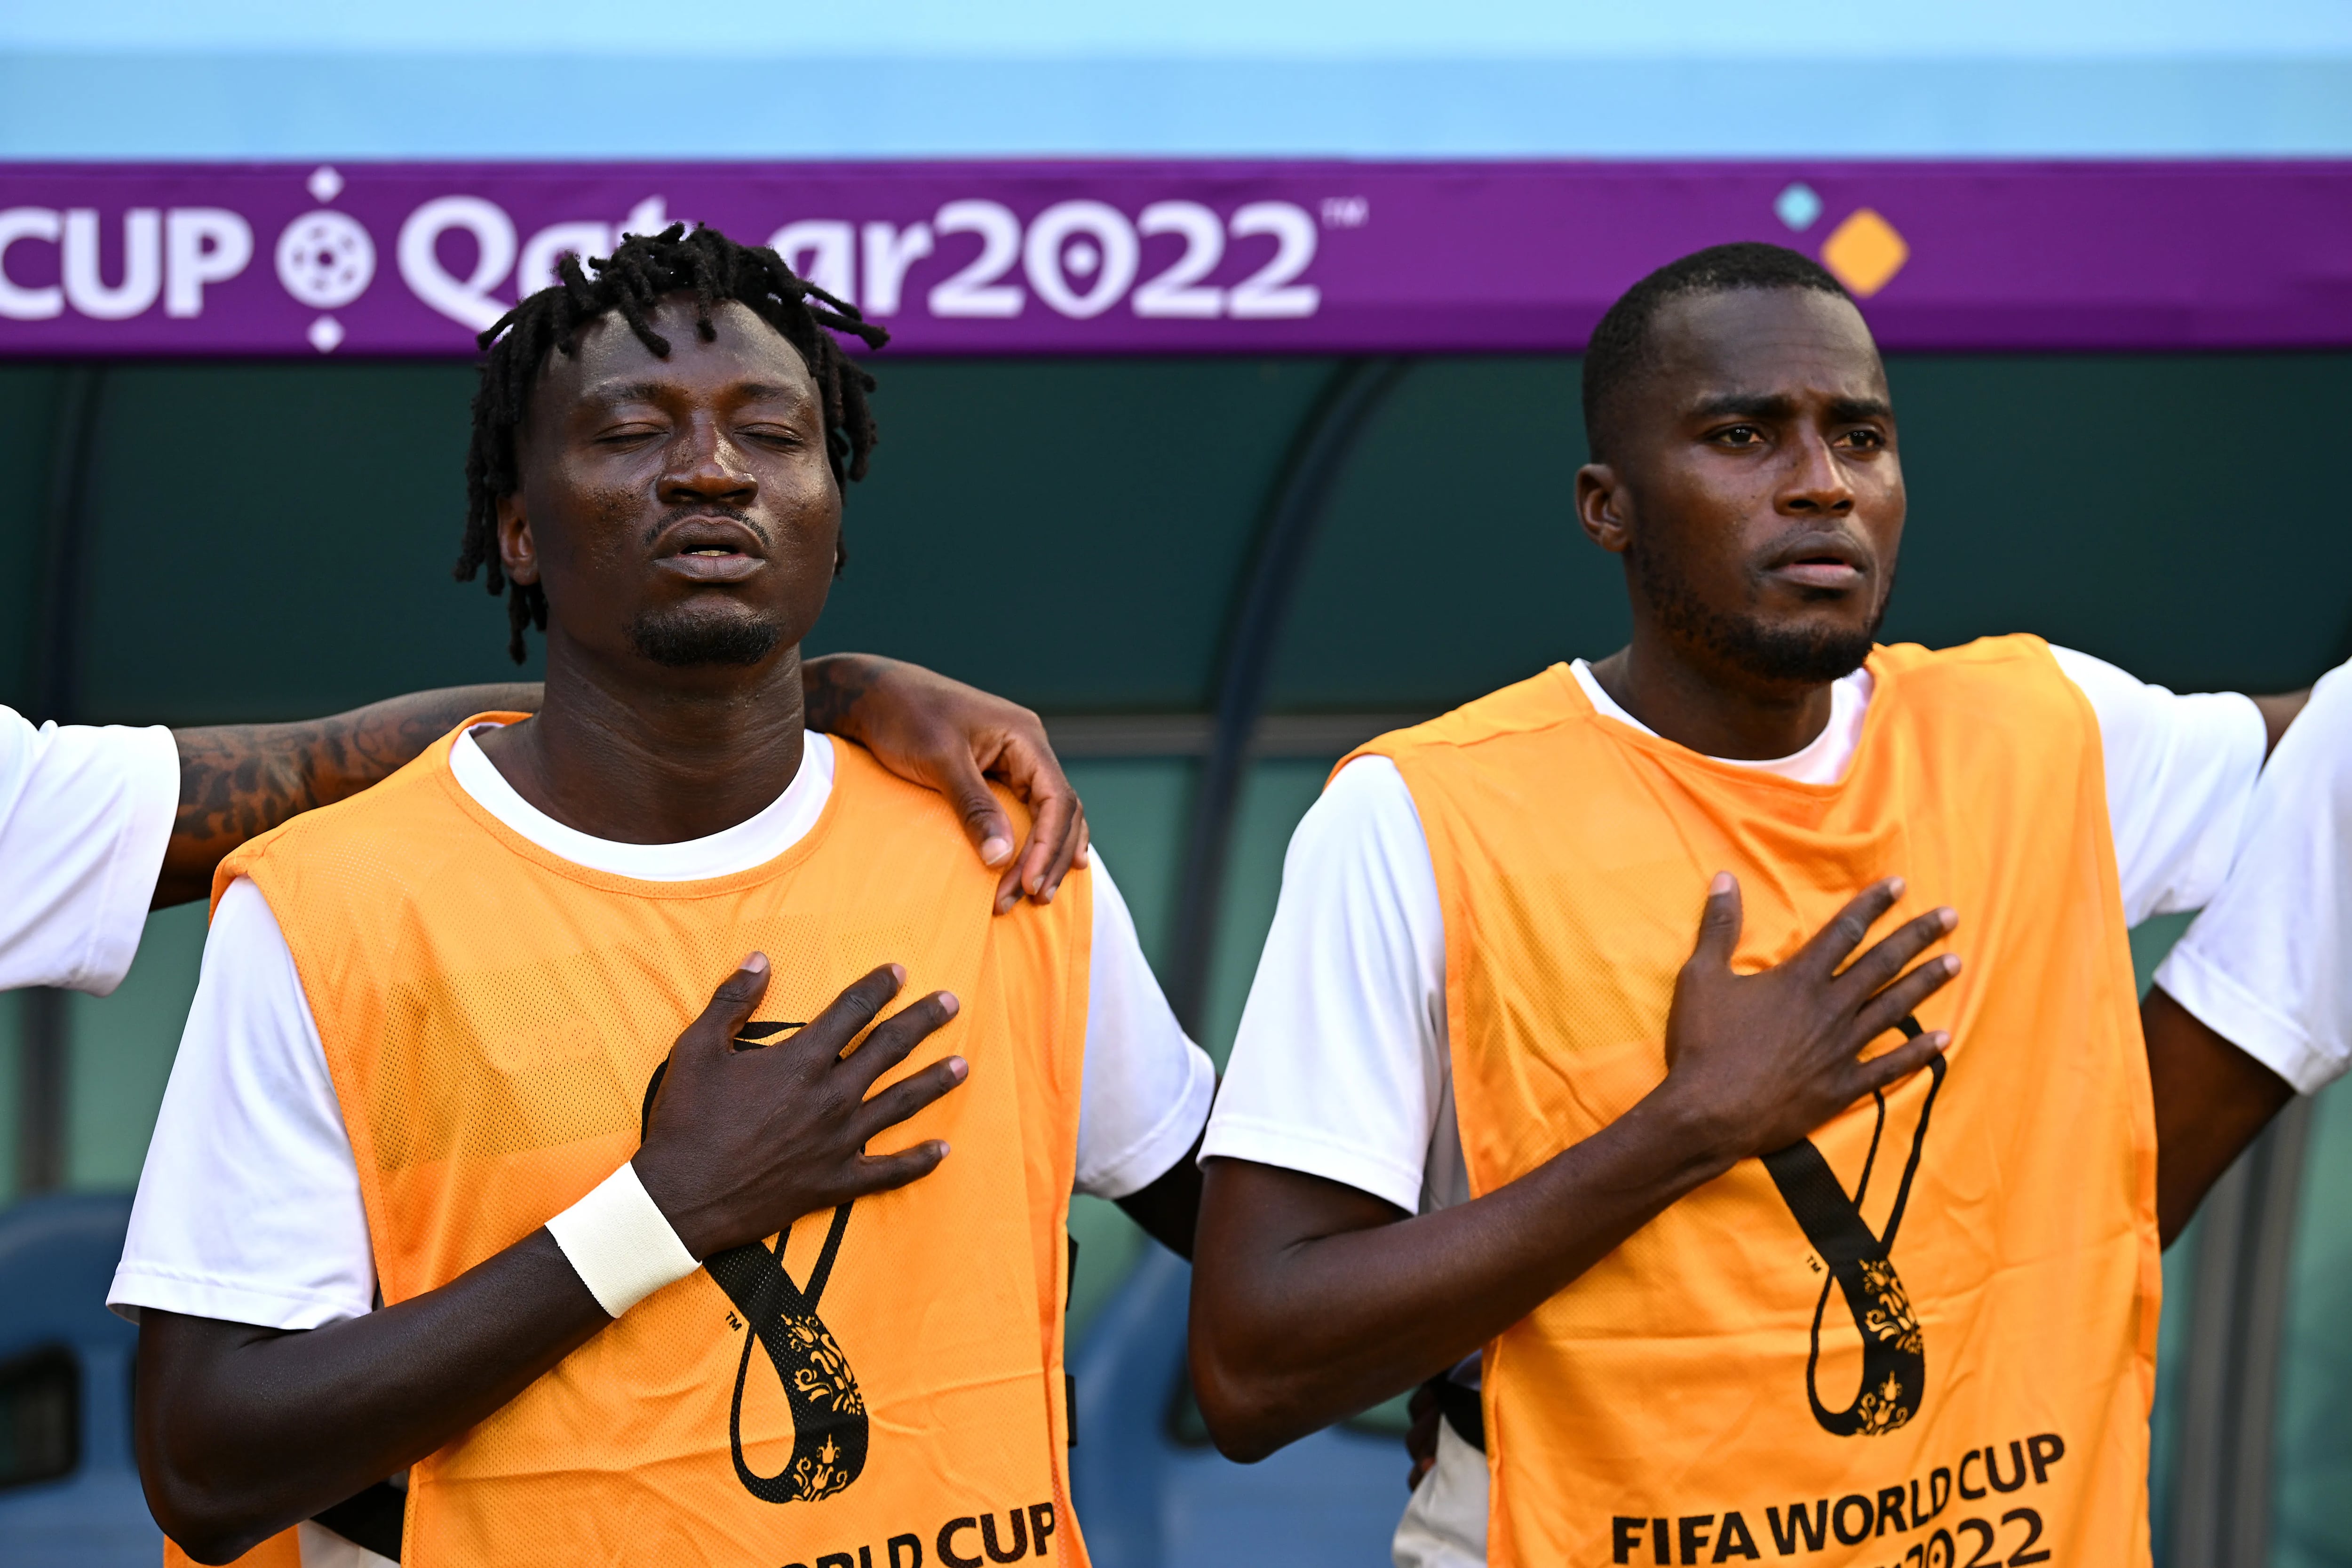 Last fall, Olivier Mbaizo (left) became the first active Union player to make a World Cup team when he earned a place on Cameroon's squad in Qatar.